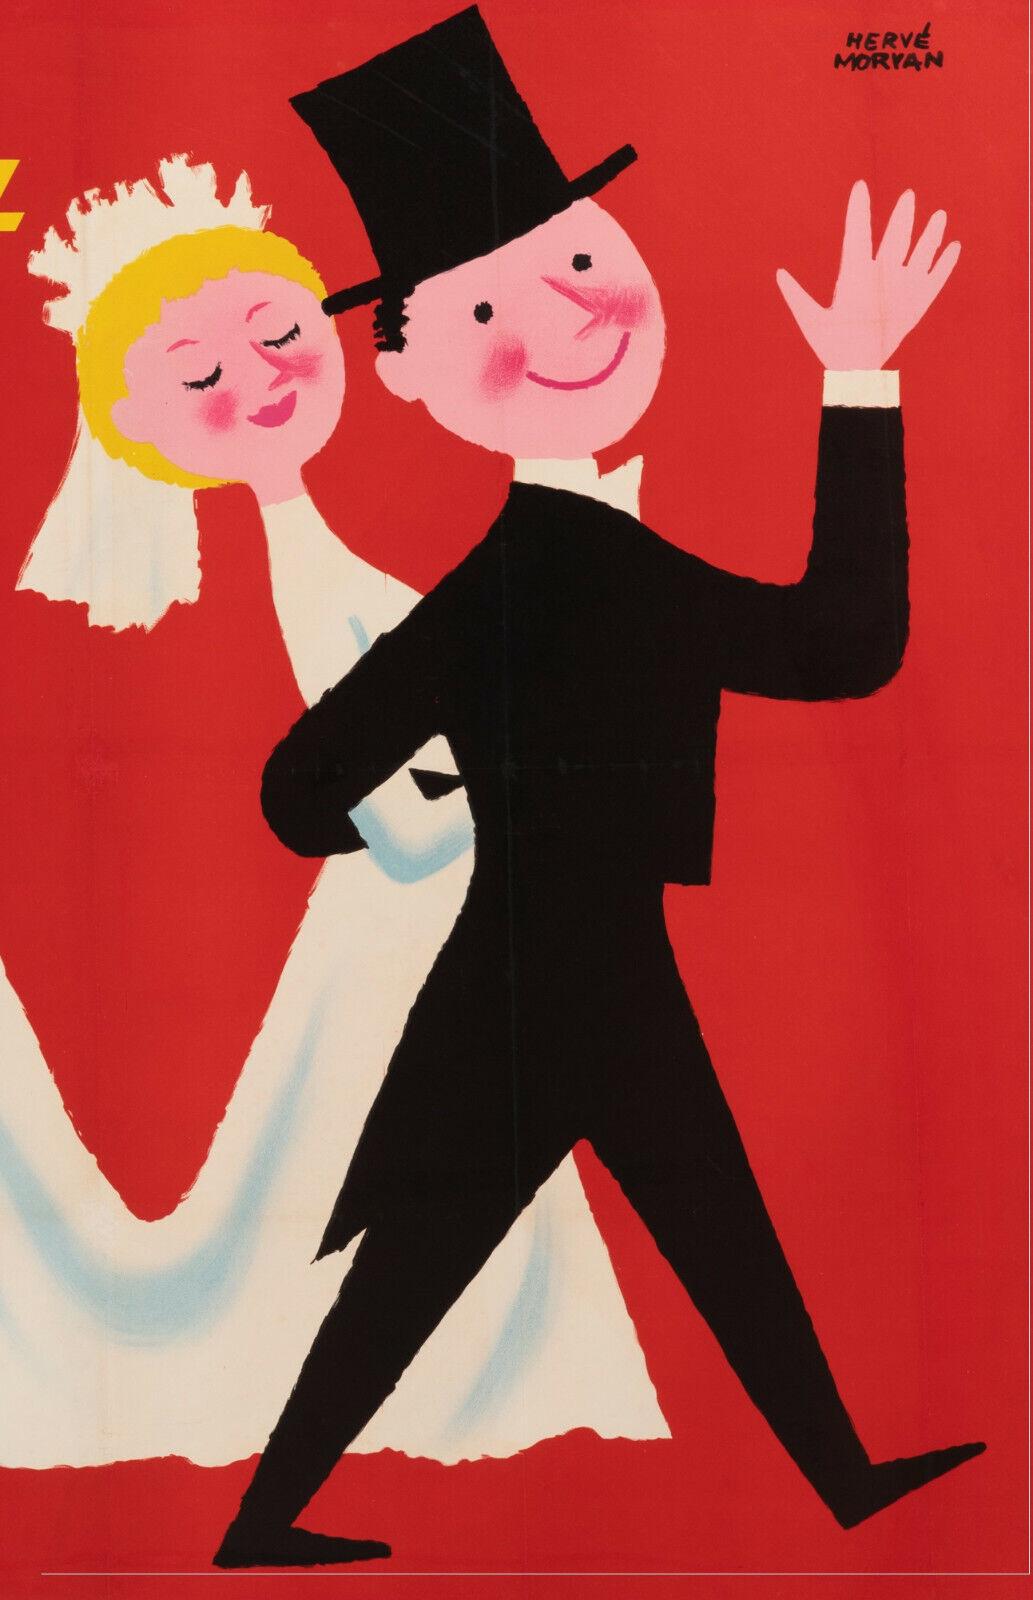 Original Vintage Poster-Herve Morvan-Brandt-Home Appliance-Marriage, c.1955

Advertising poster for the Brandt brand washing machine.
A newlywed couple whose wedding dress comes straight from the washing machine is about to go to exchange